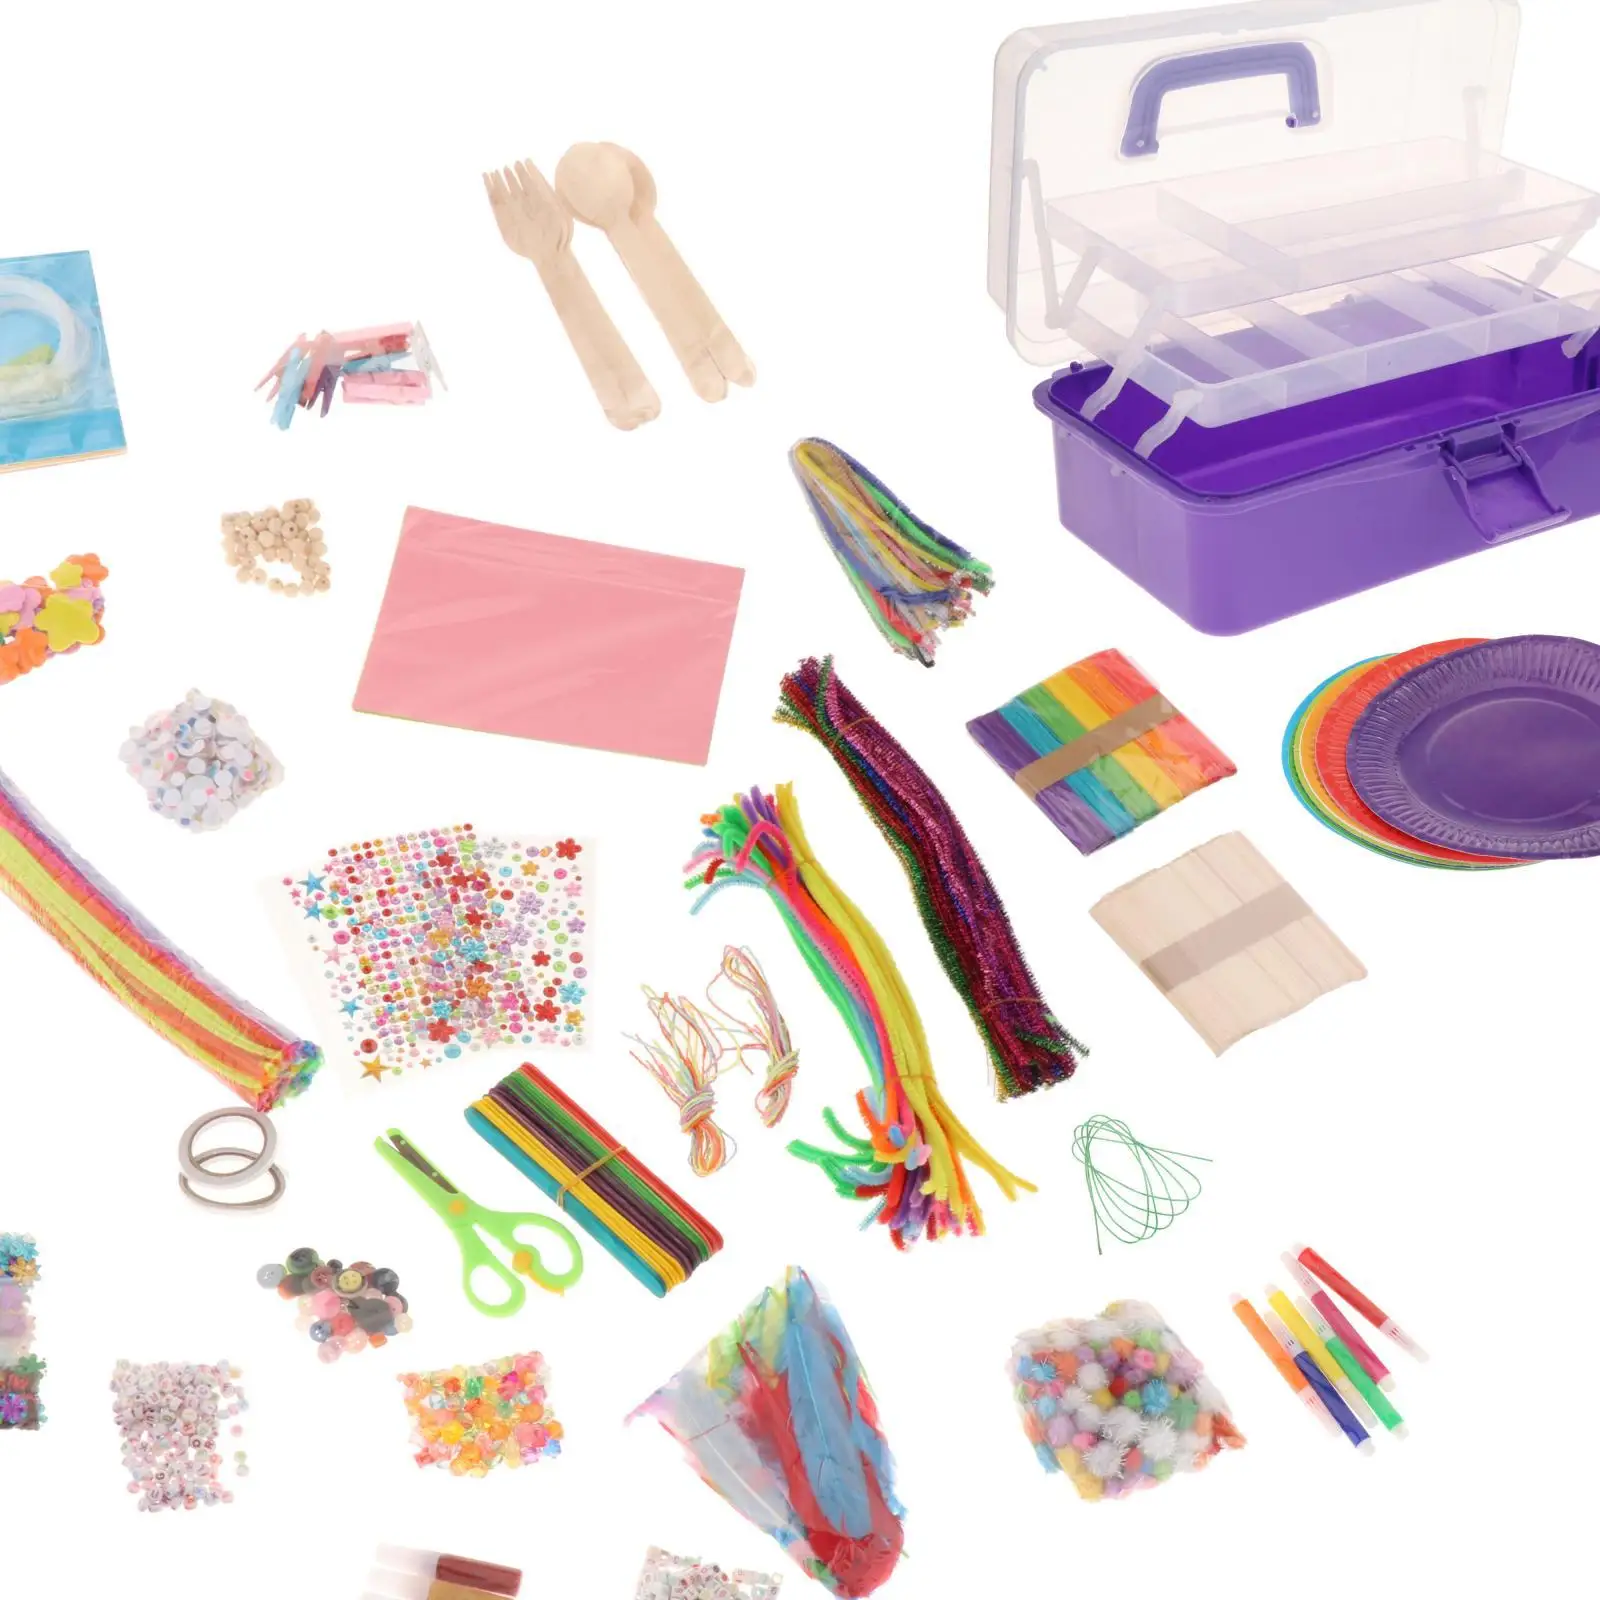   Crafts Supplies  Kit  with Storage Box for Holiday Gifts   Children Boys and Girls